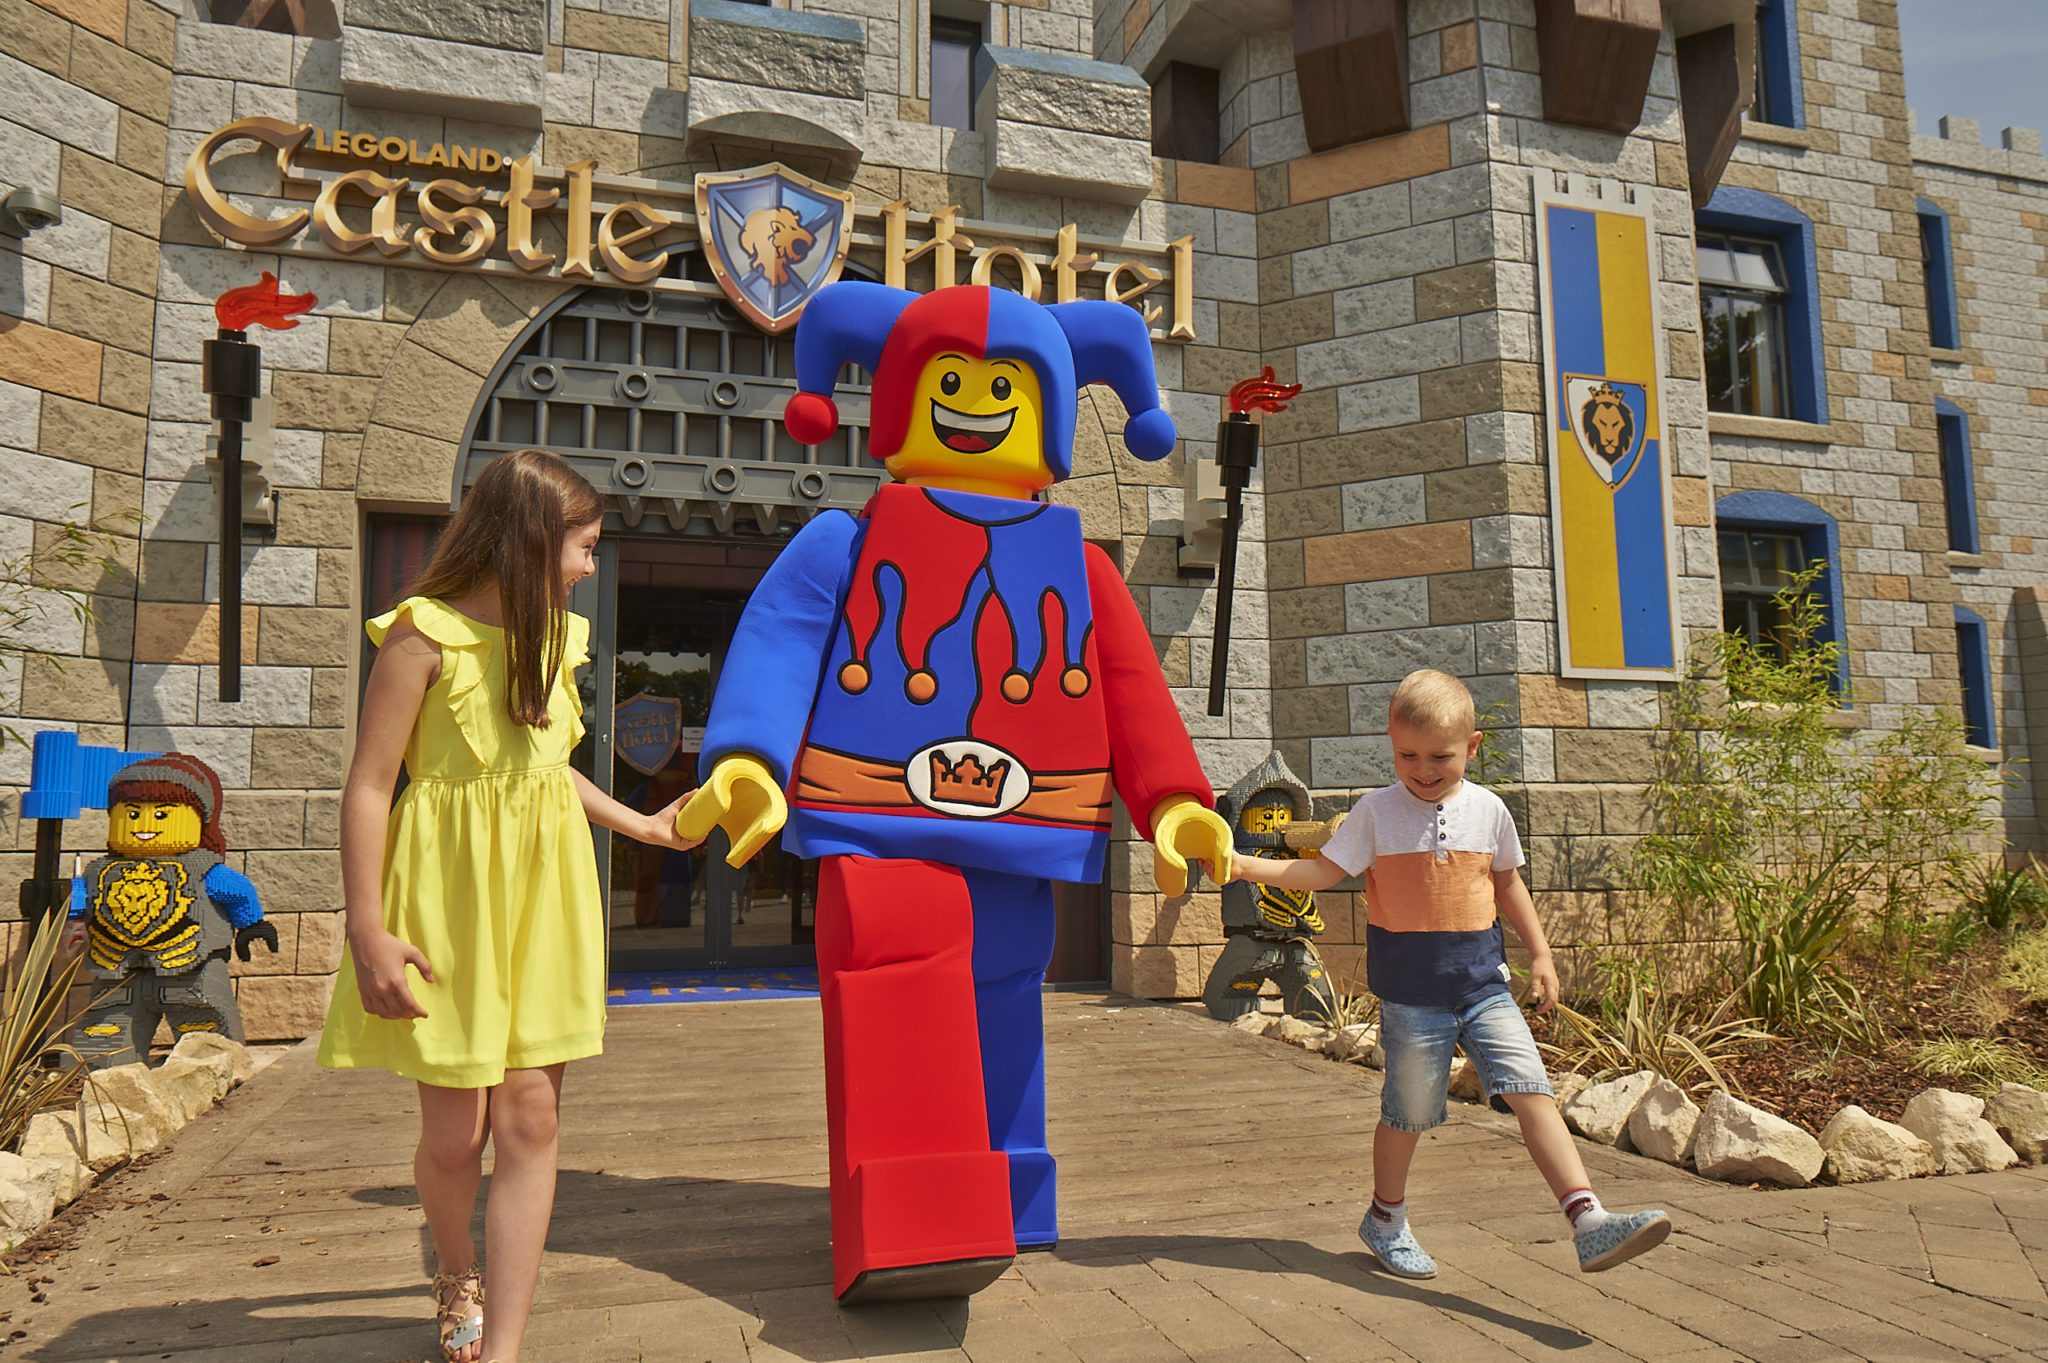 A LEGO character outside the castle hotel entrance with 2 people